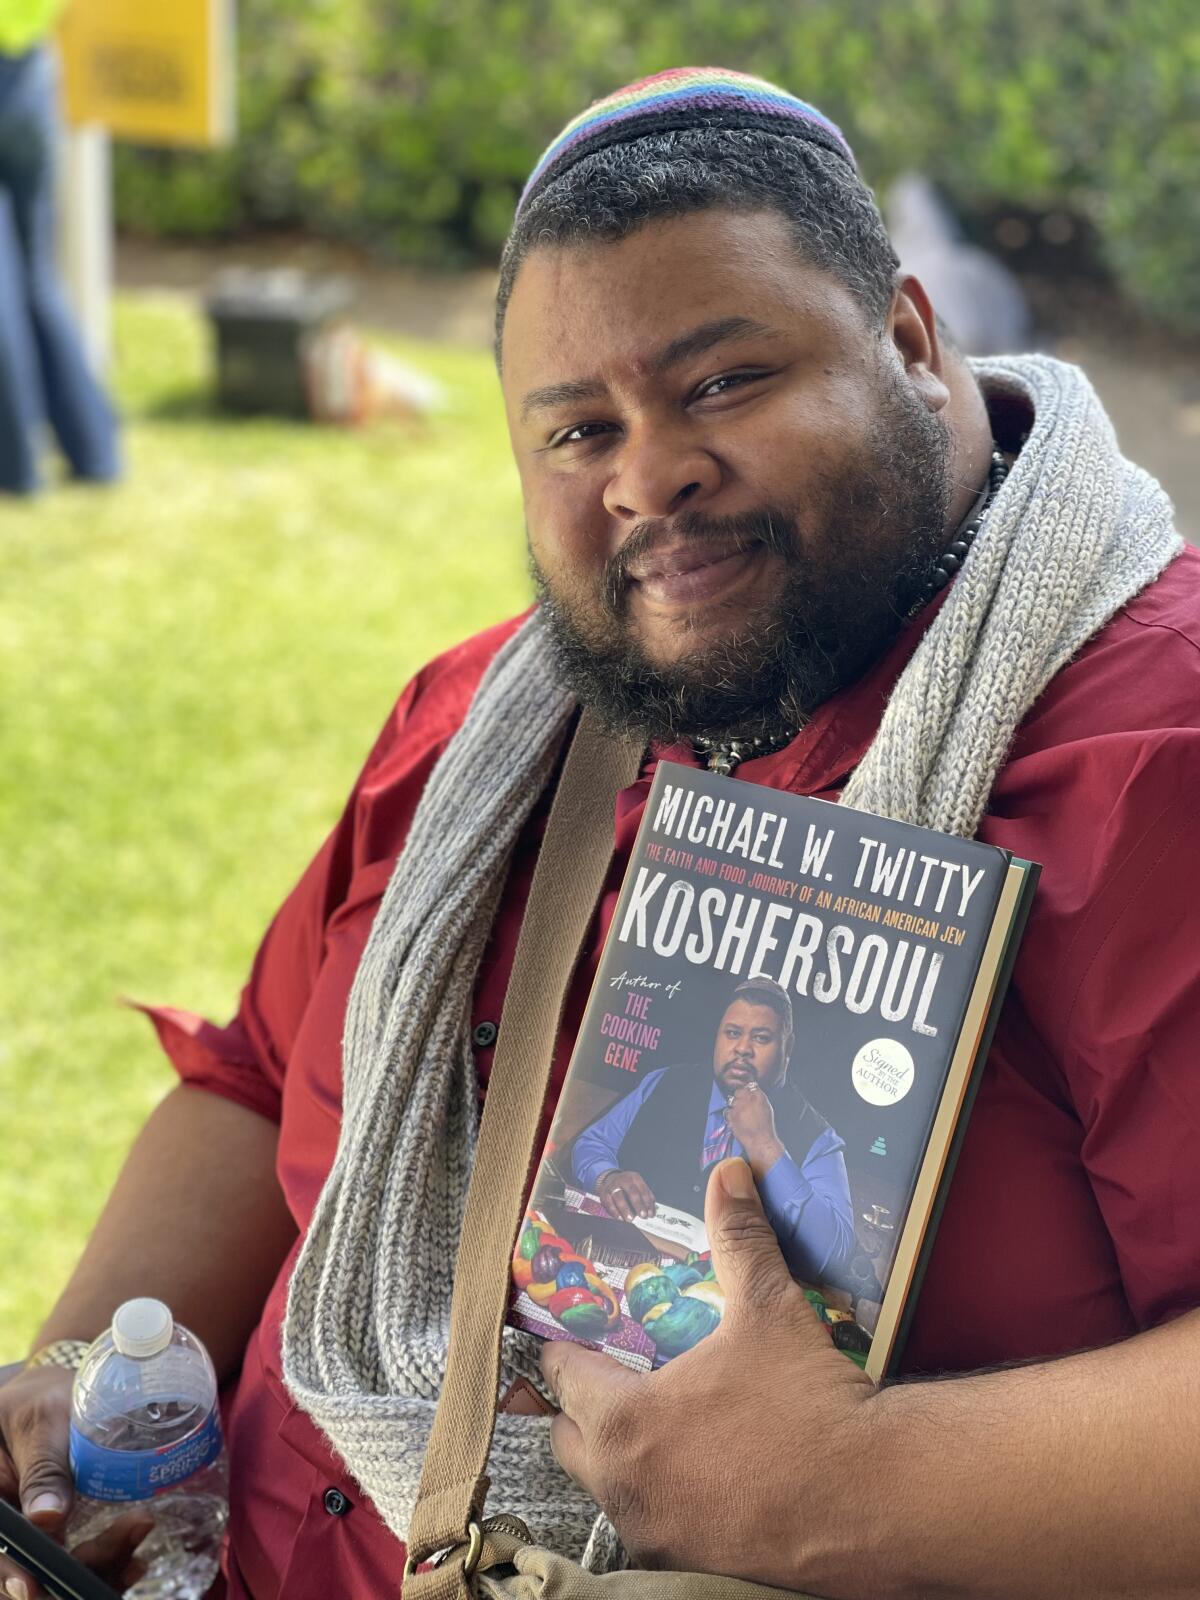 "Koshersoul" author Michael W. Twitty at the 2024 L.A. Times Festival of books.